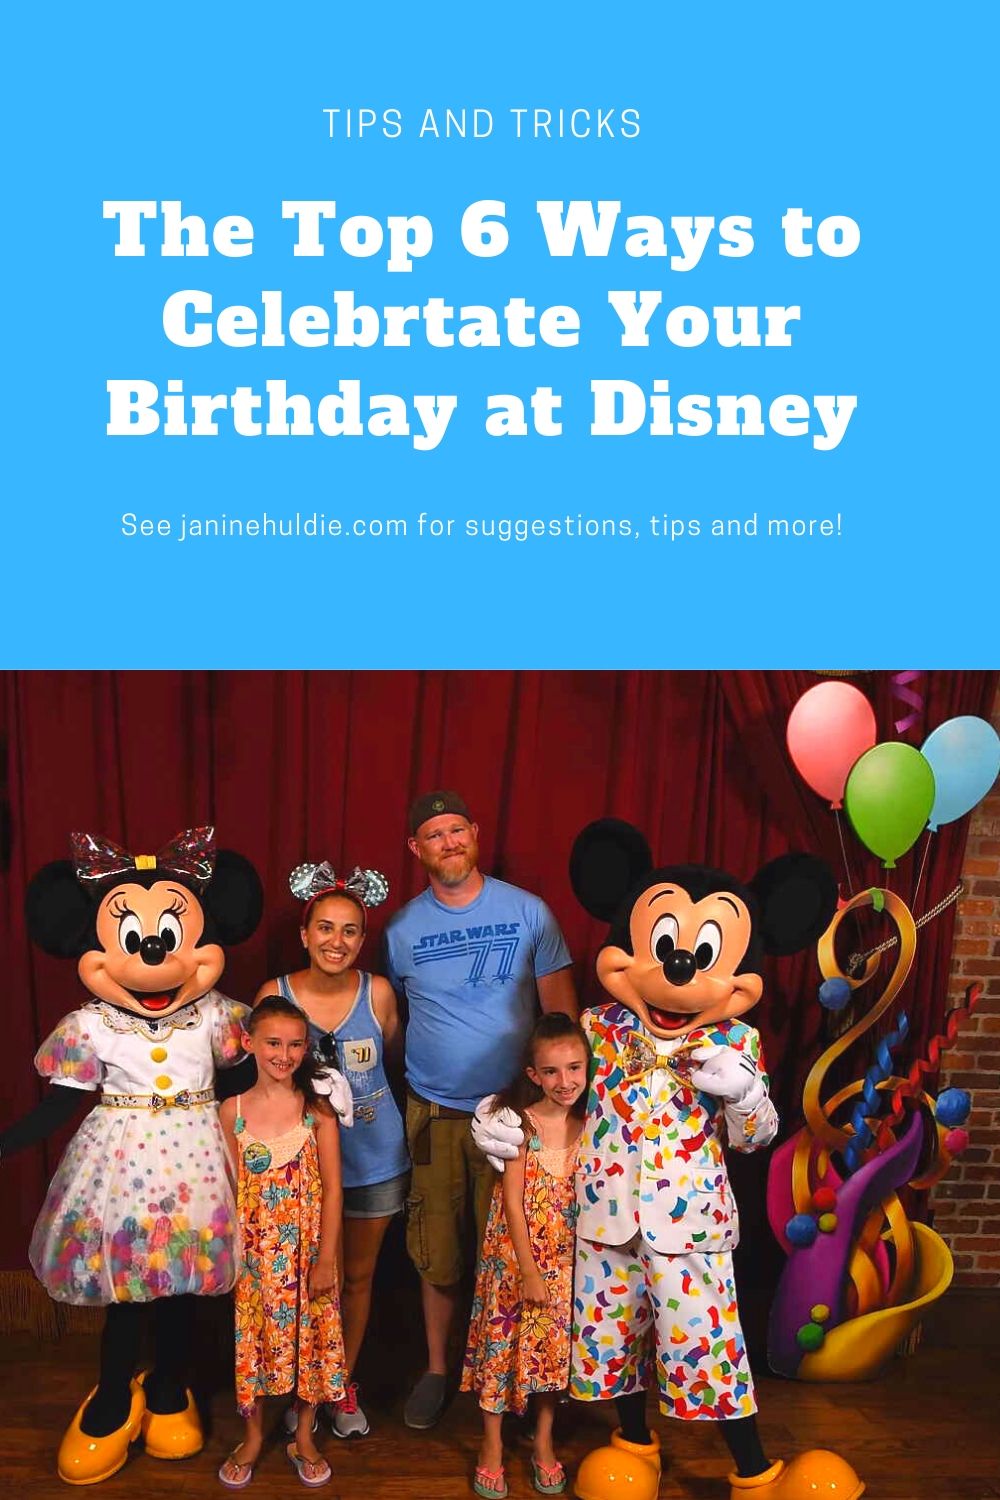 The Top 6 Ways to Celebrate Your Birthday at Disney